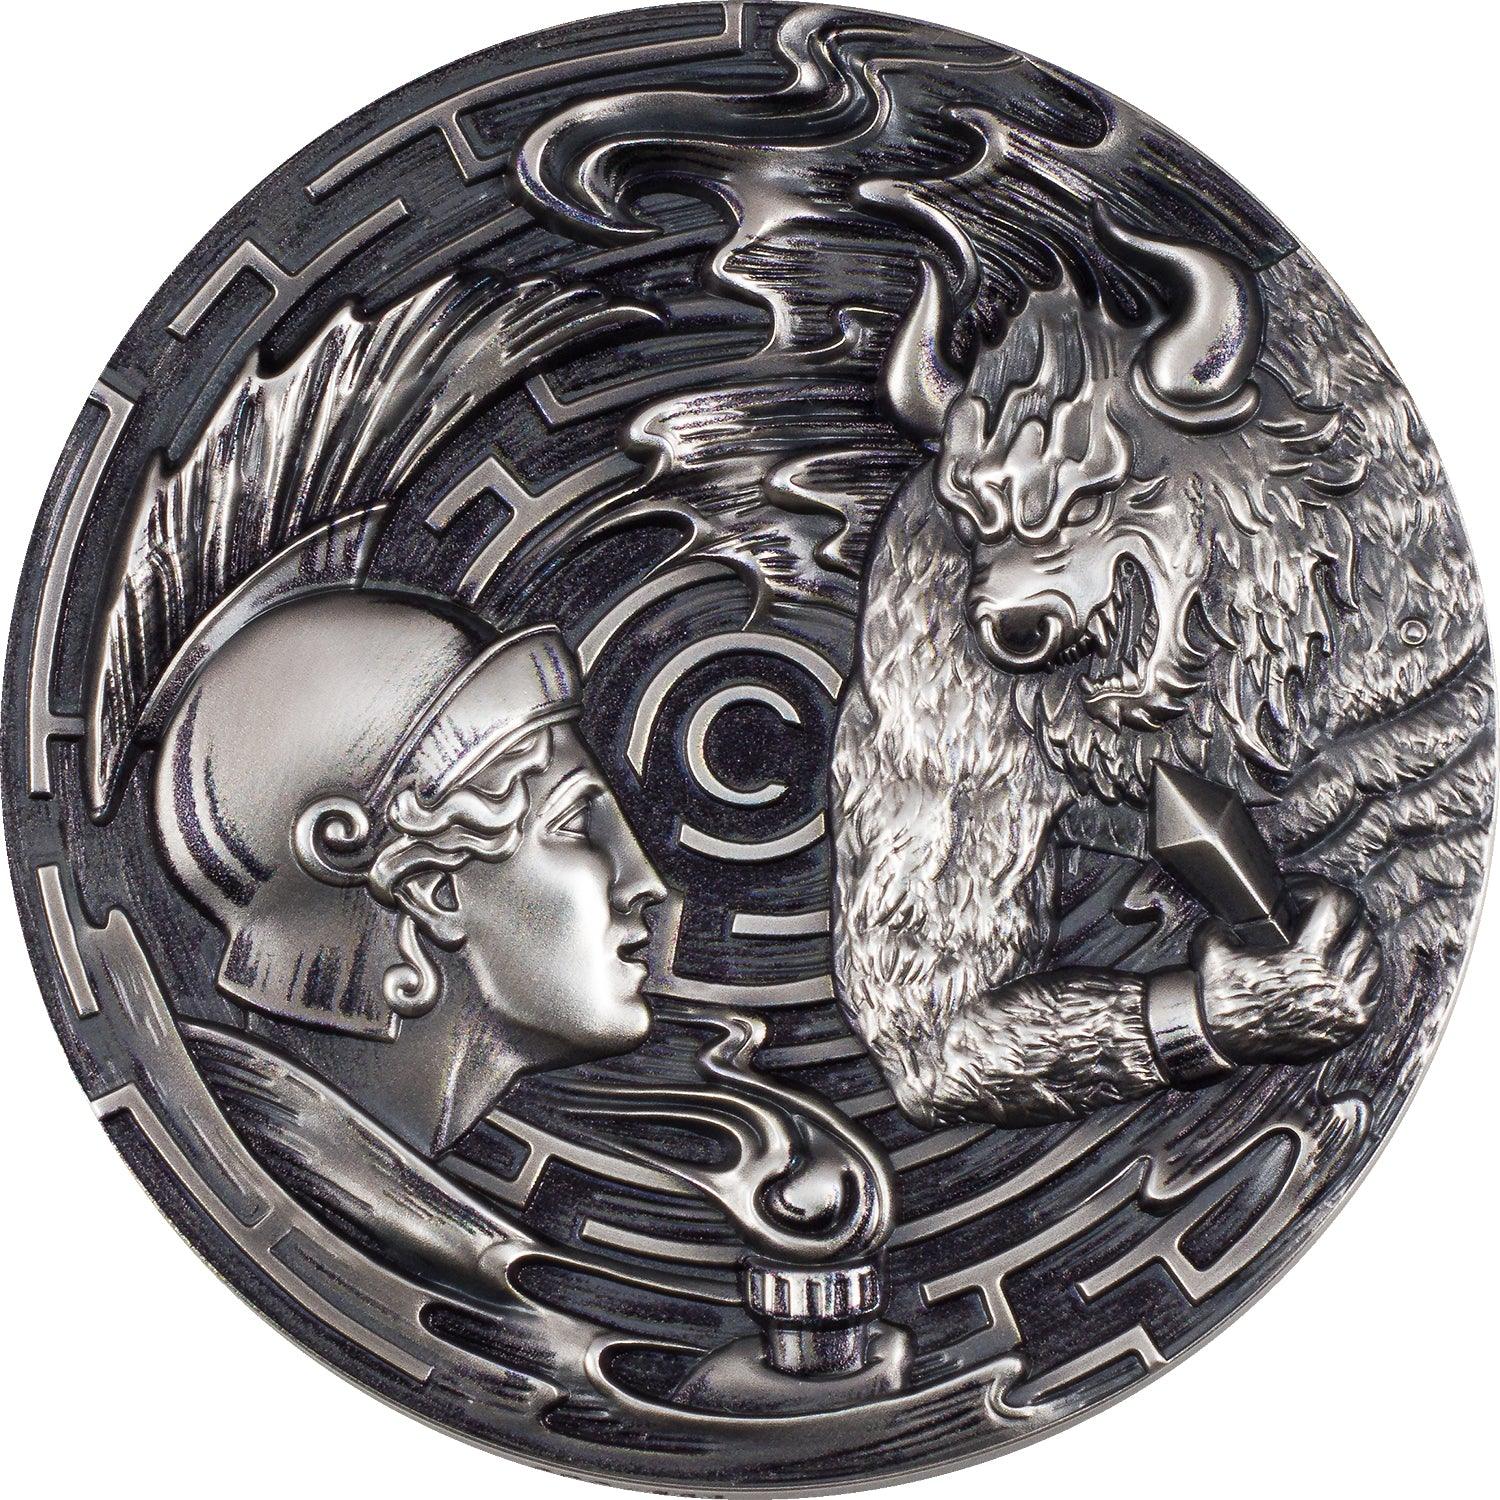 THESEUS AND THE MINOTAUR Evil Within 3 Oz Silver Coin $20 Palau 2021 - PARTHAVA COIN